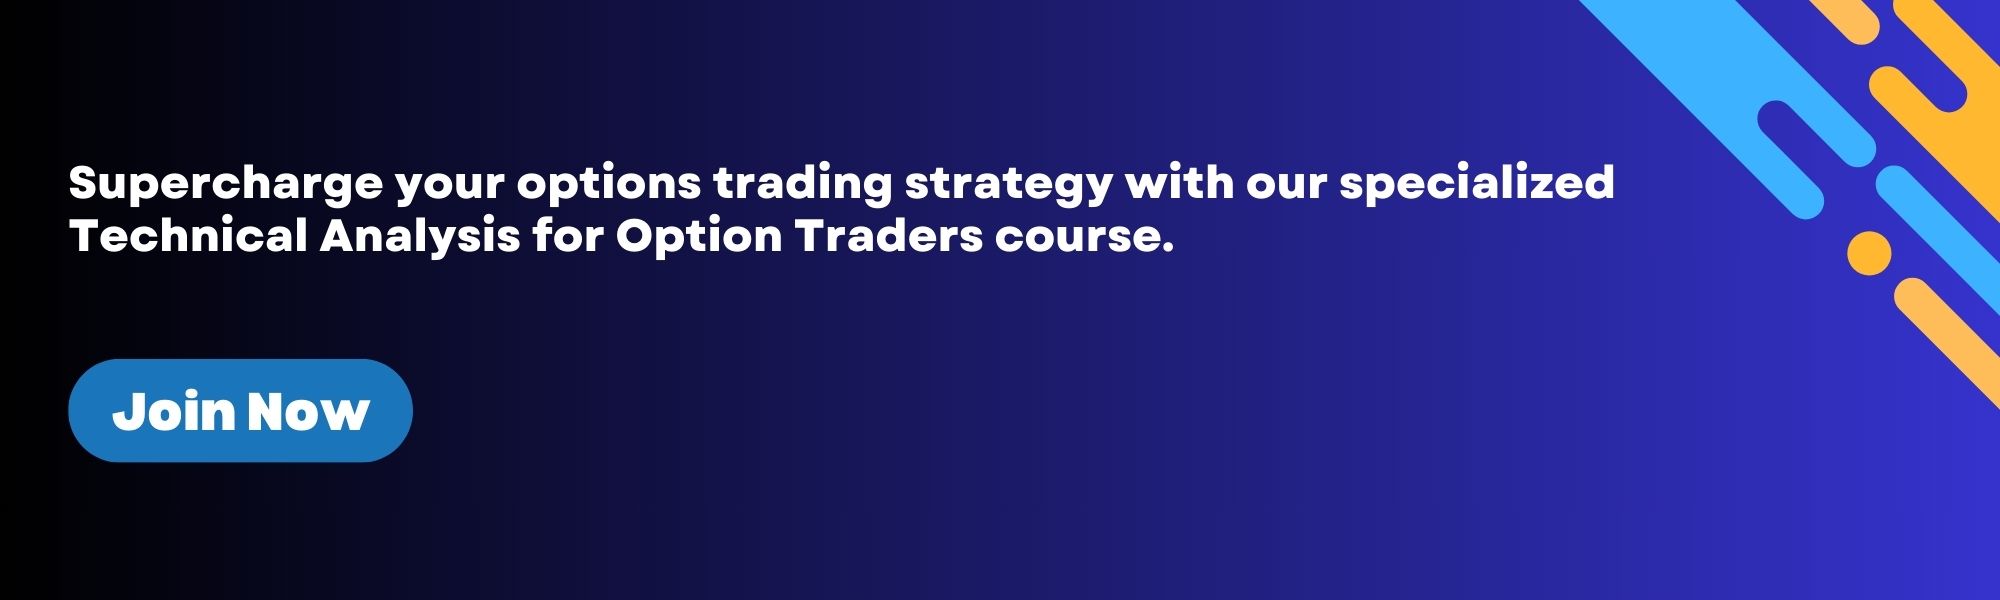 Technical Analysis for Option Traders